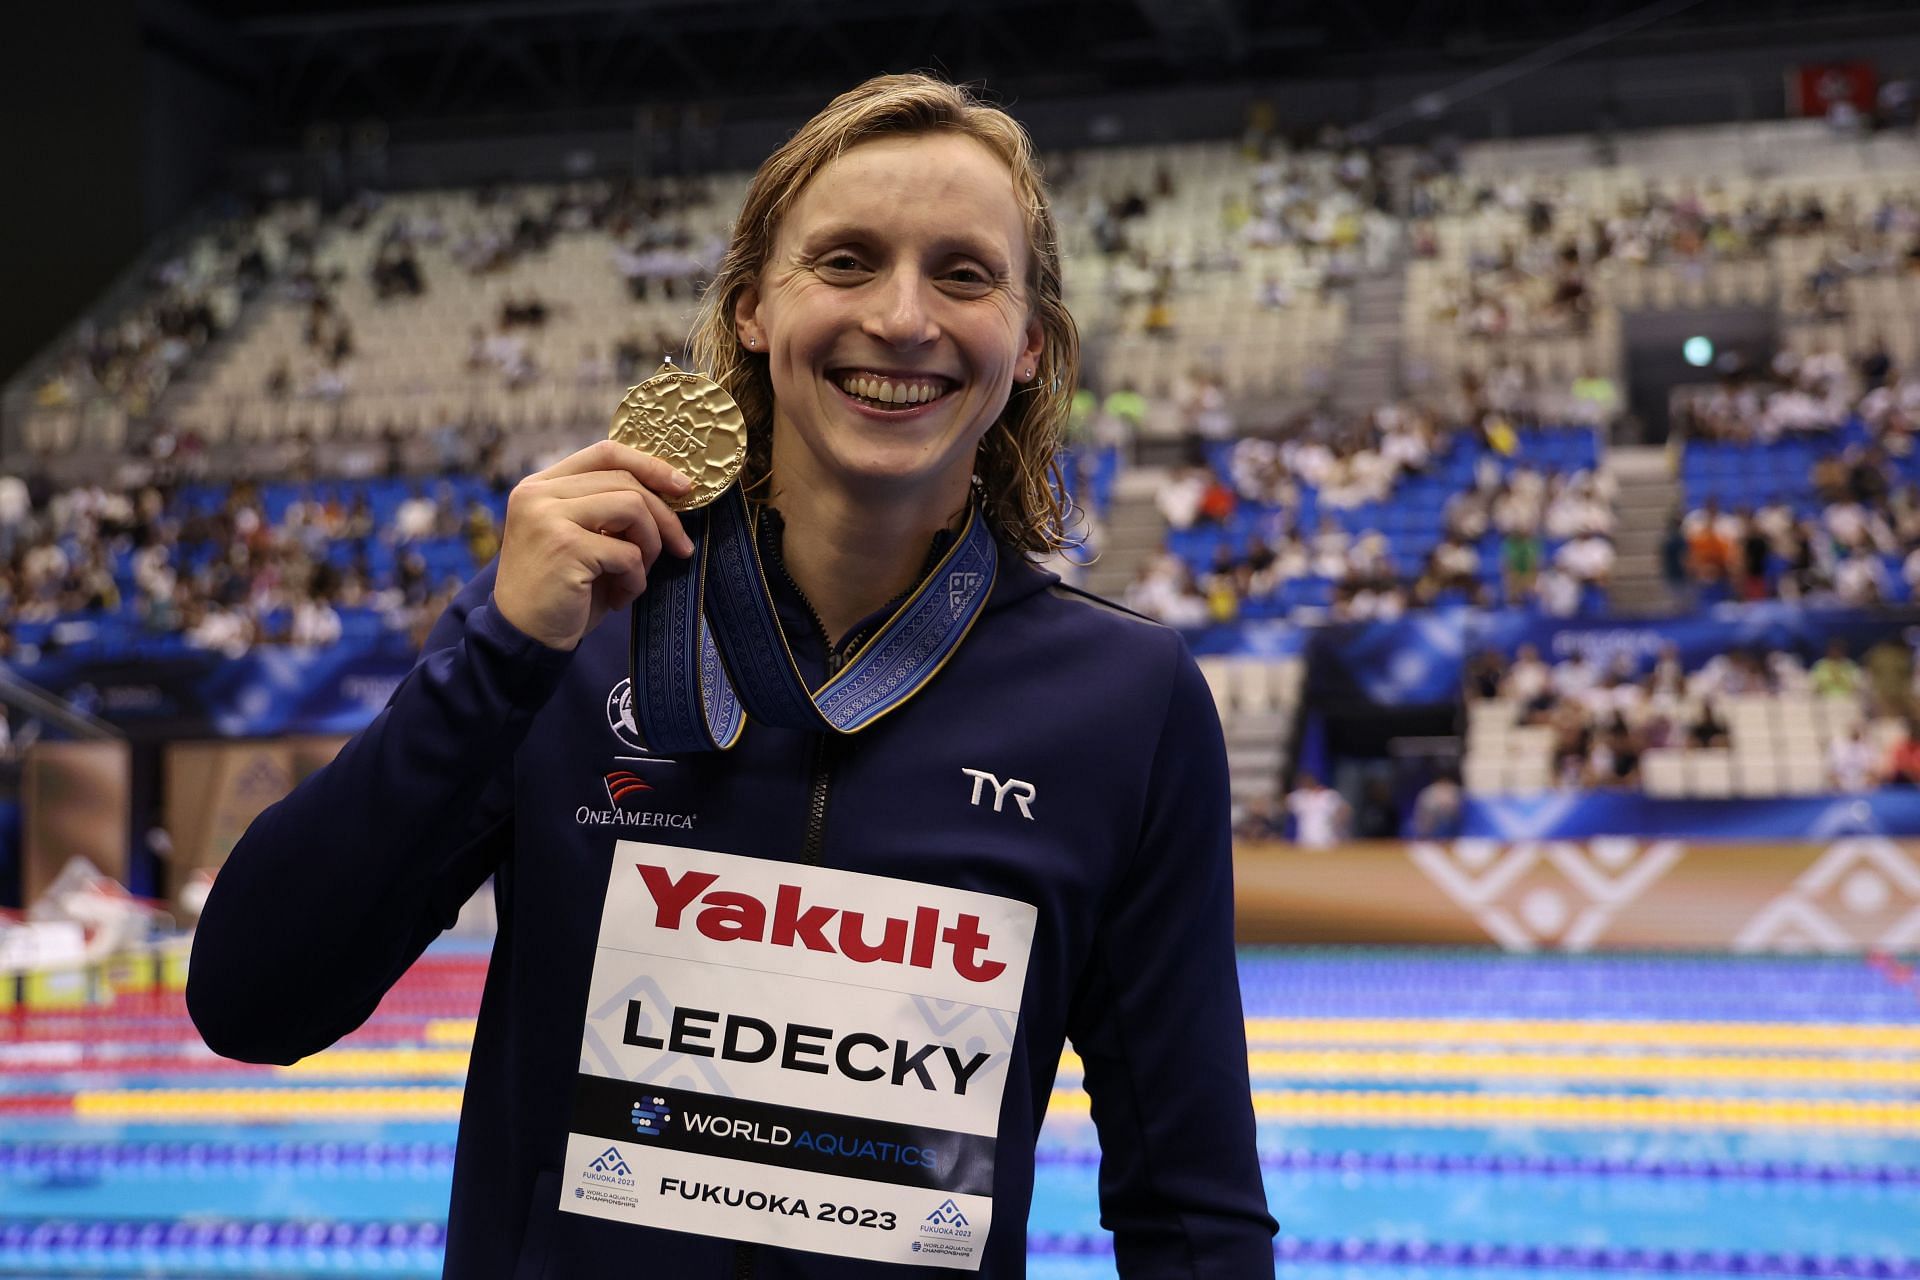 Katie Ledecky at the 2023 World Aquatics Championships. (PC: Getty Images)